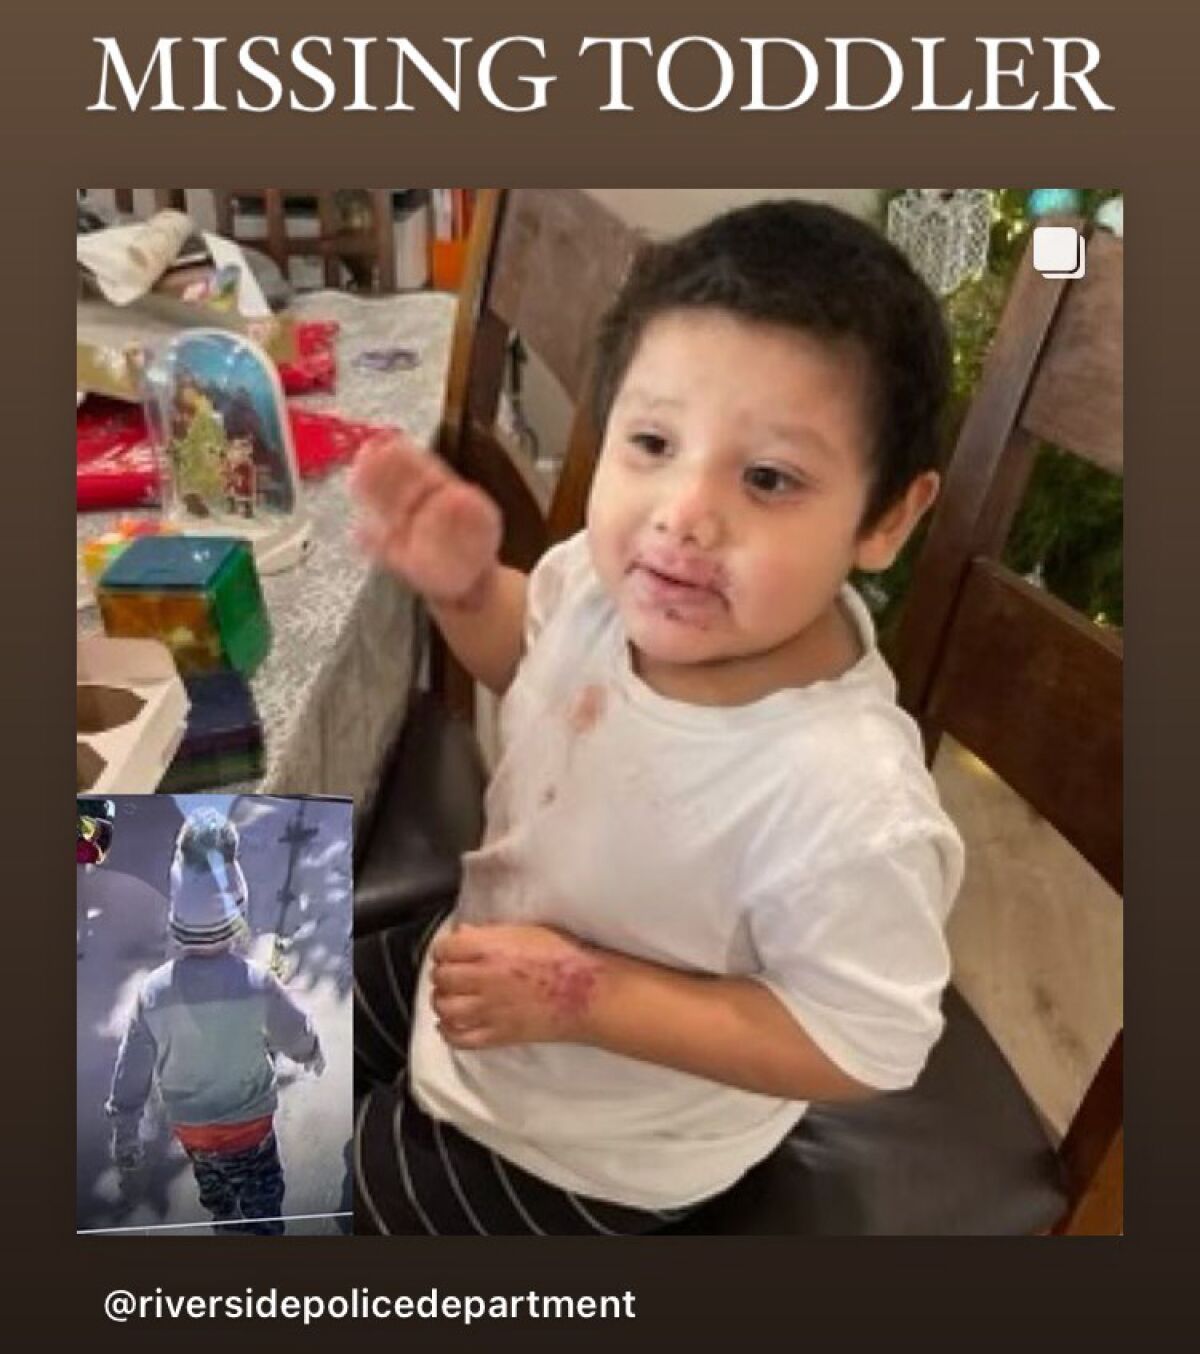 Photos of missing toddler posted by Riverside police.